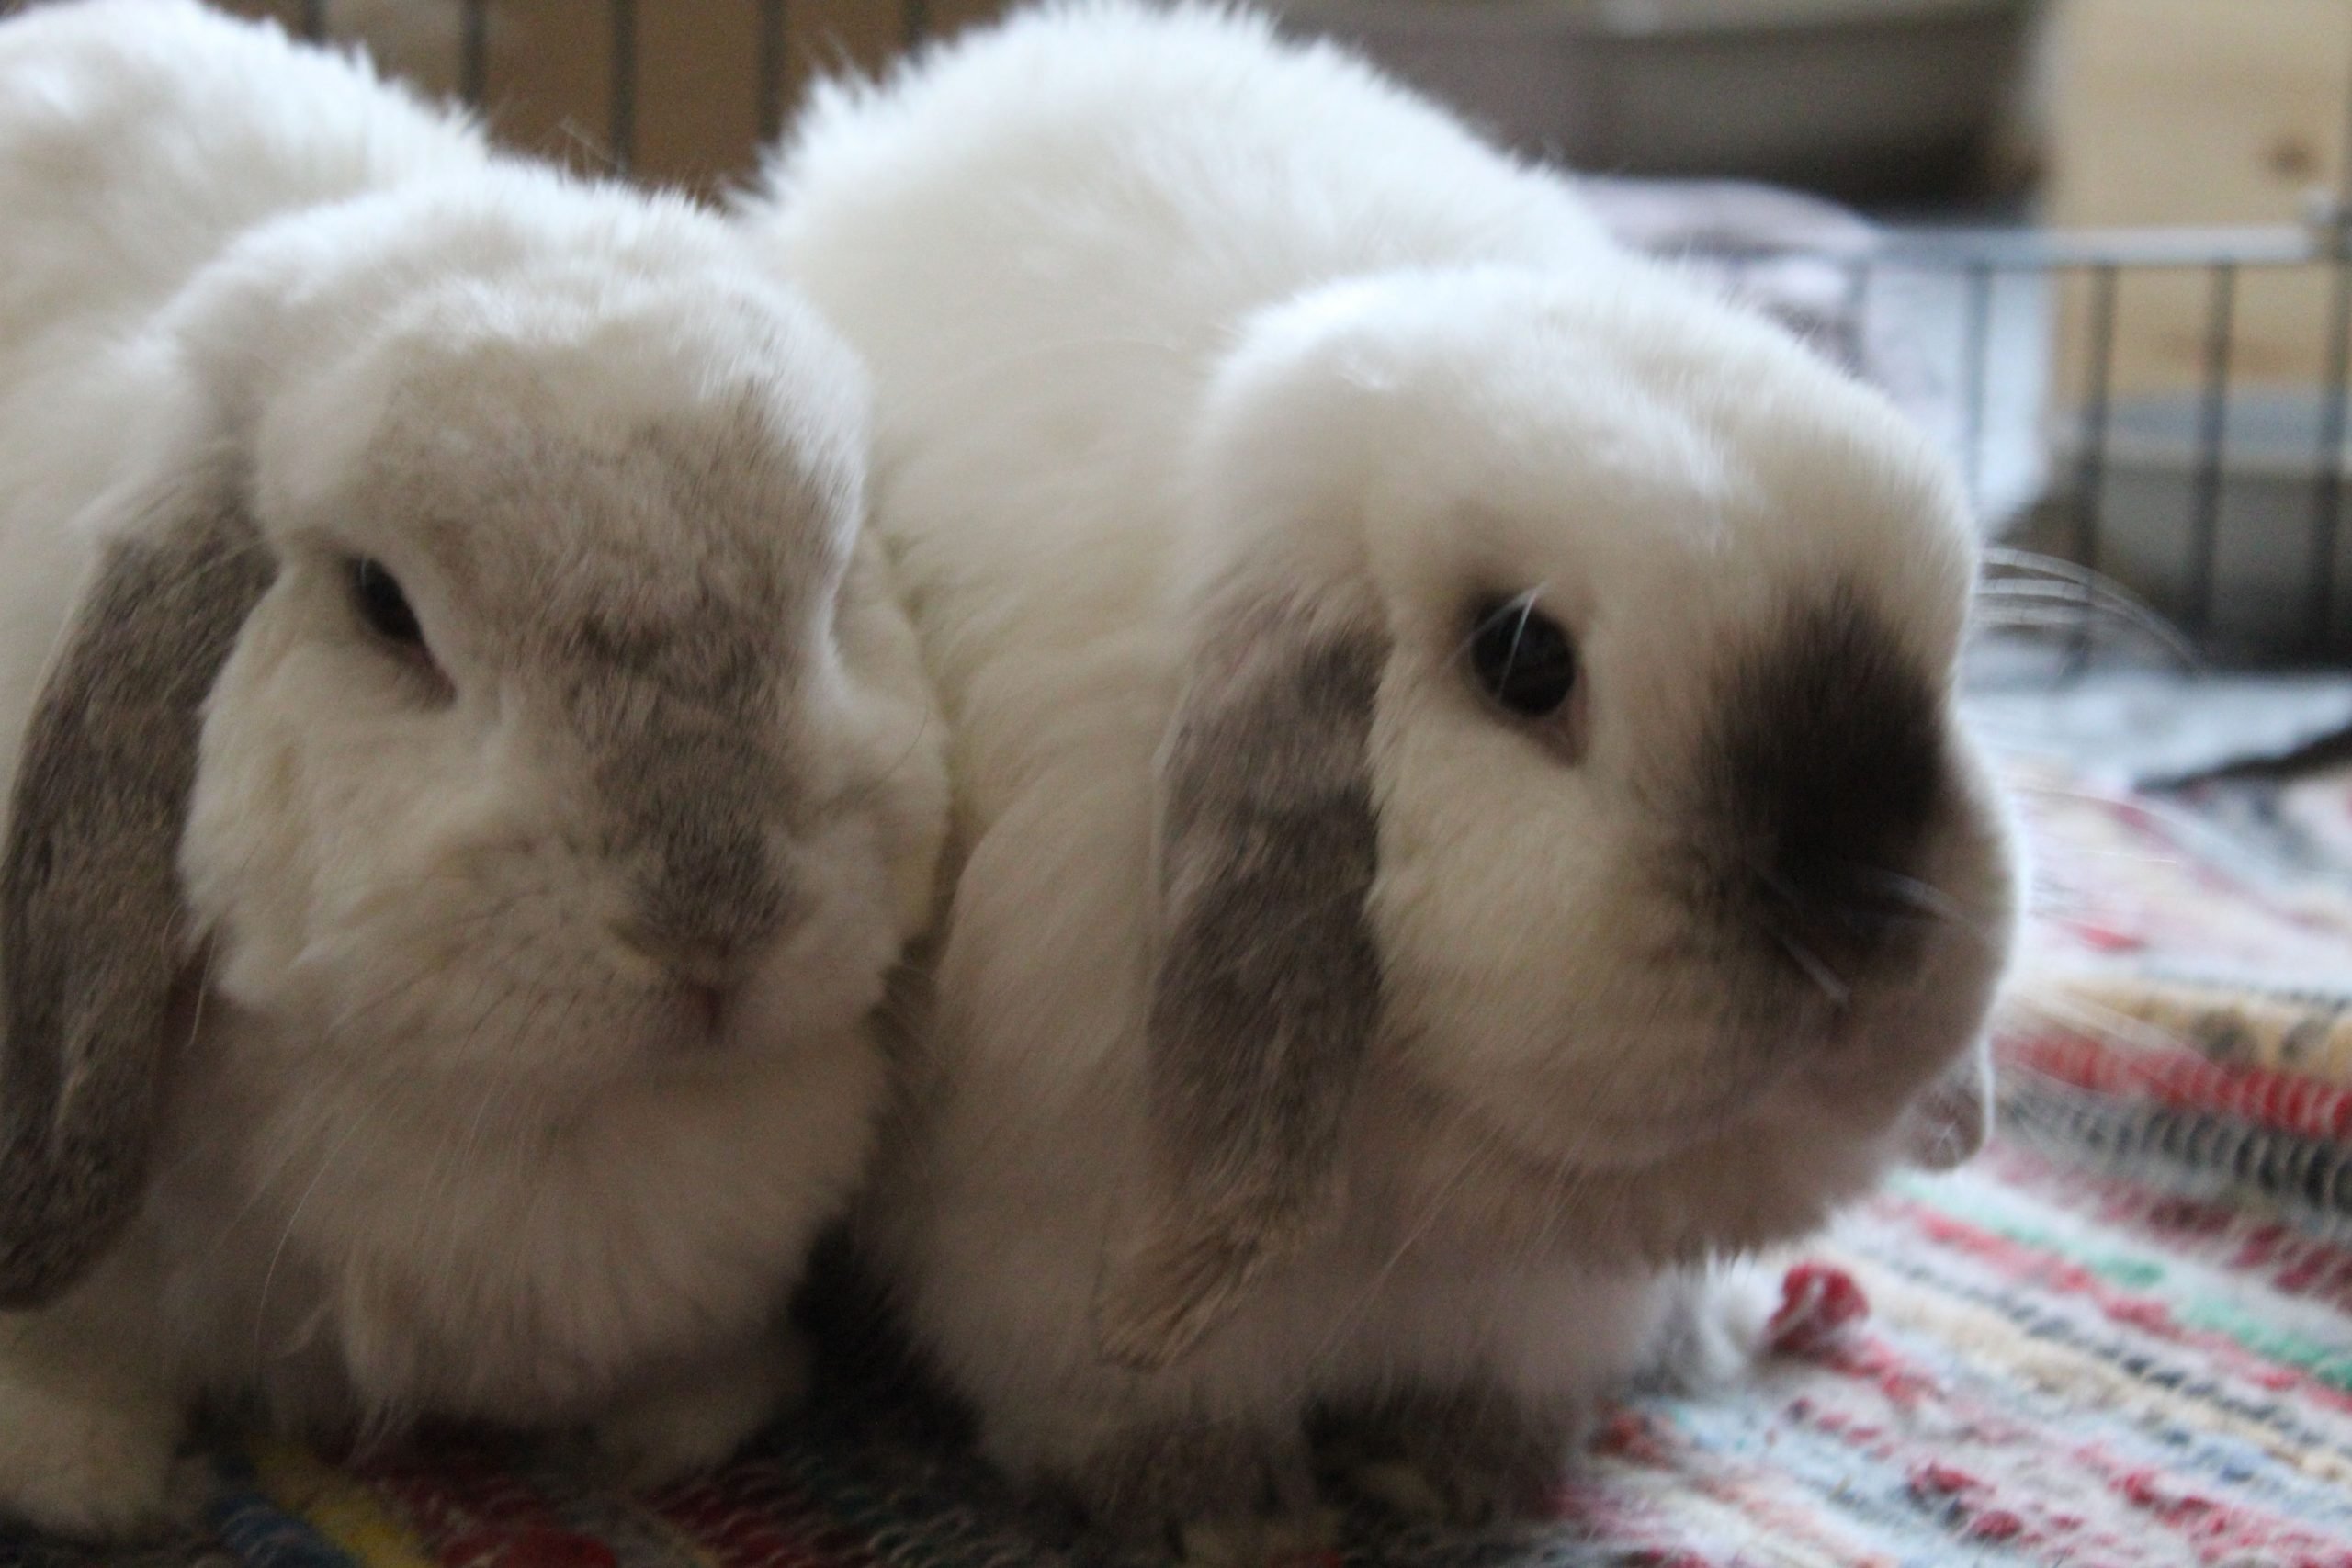 Two house rabbits.